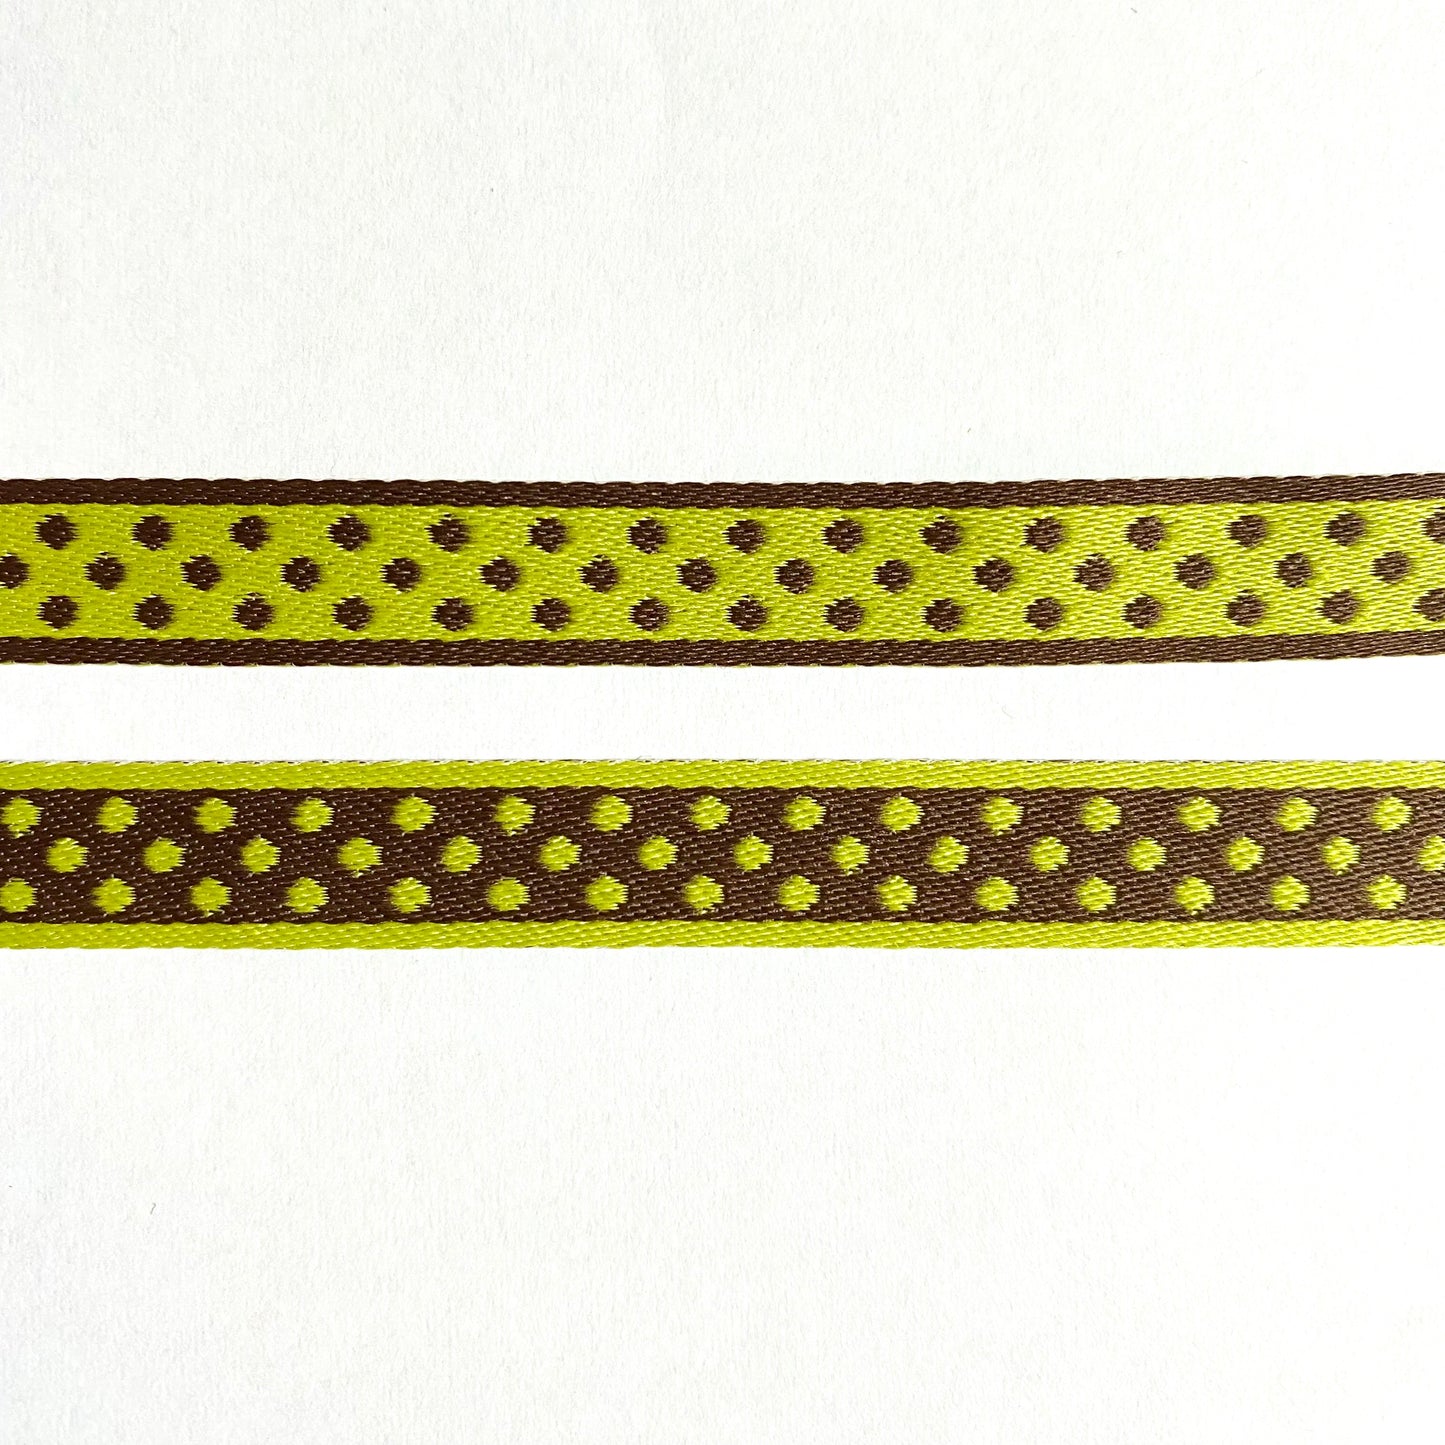 Dotted ribbon 12 mm